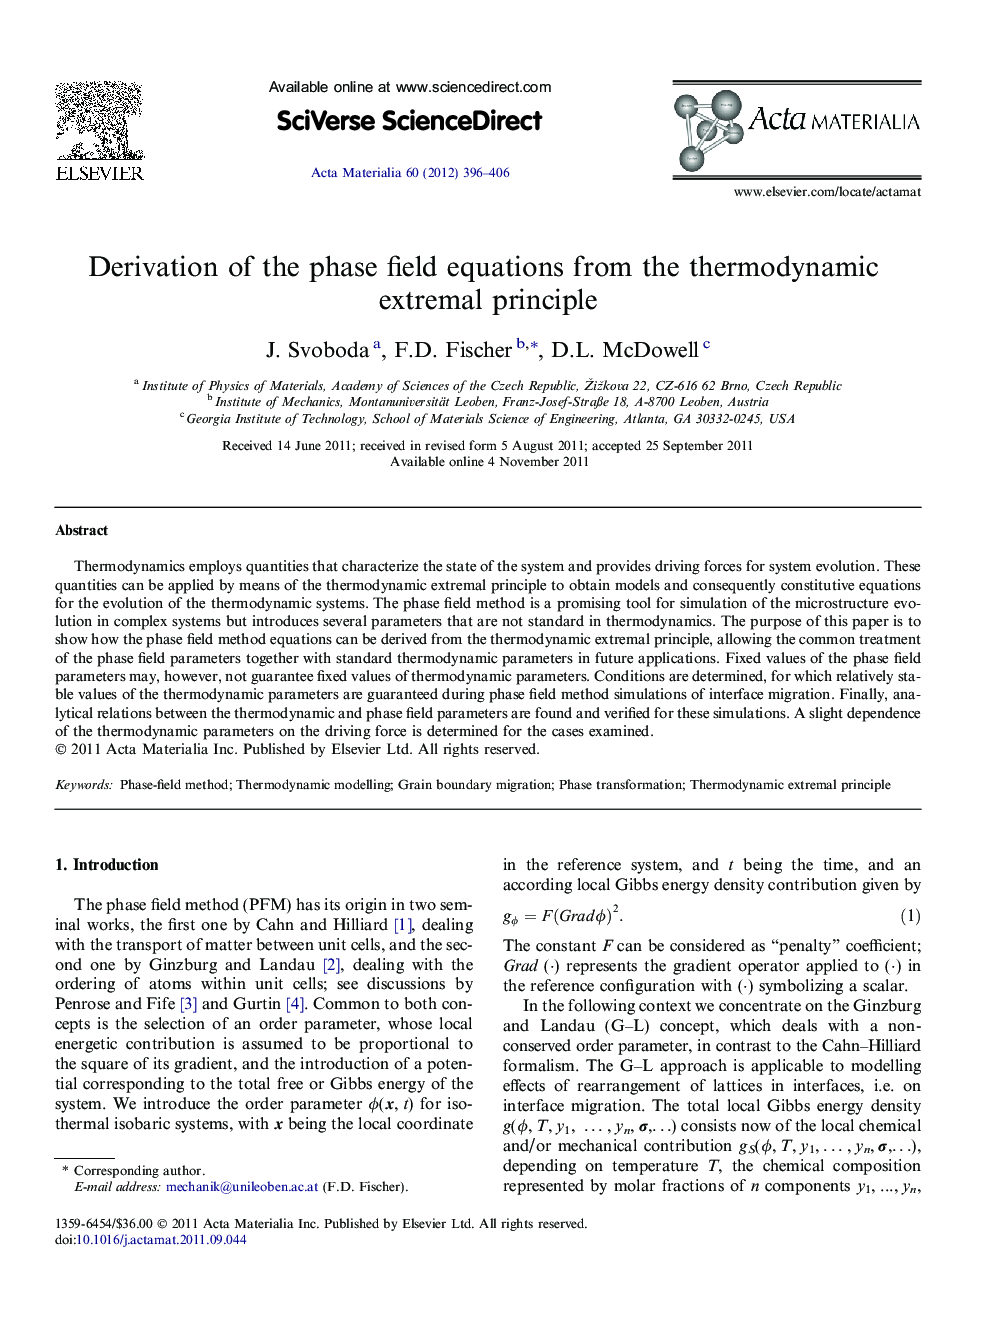 Derivation of the phase field equations from the thermodynamic extremal principle